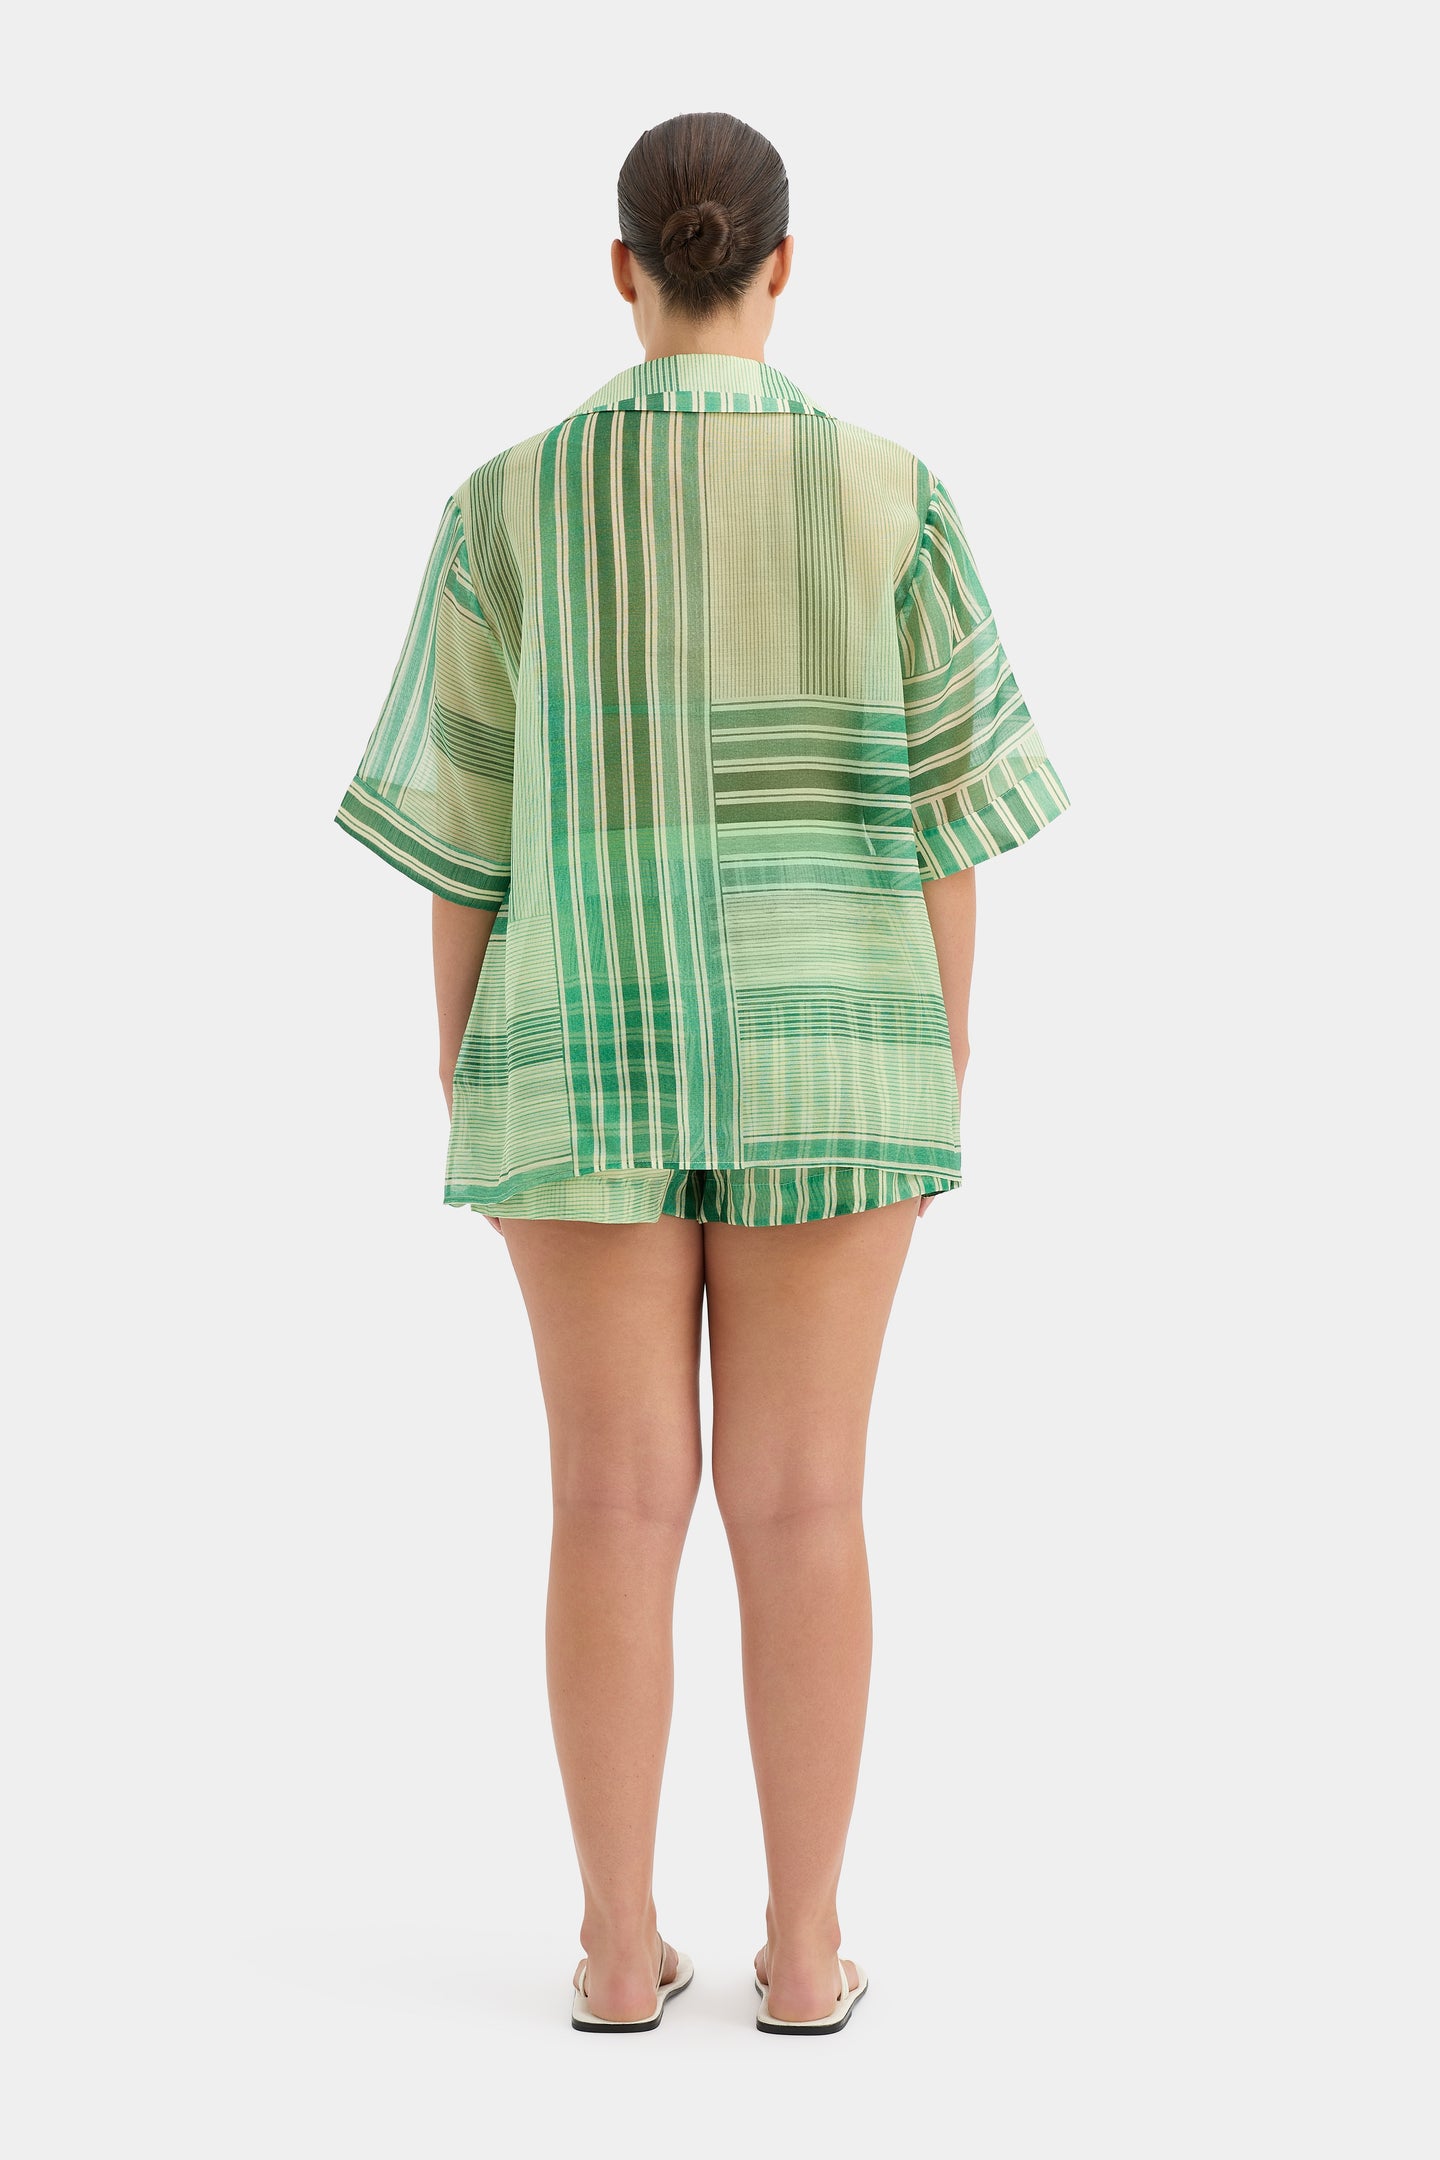 SIR the label Marisol Corded Short GREEN PATCHWORK STRIPE